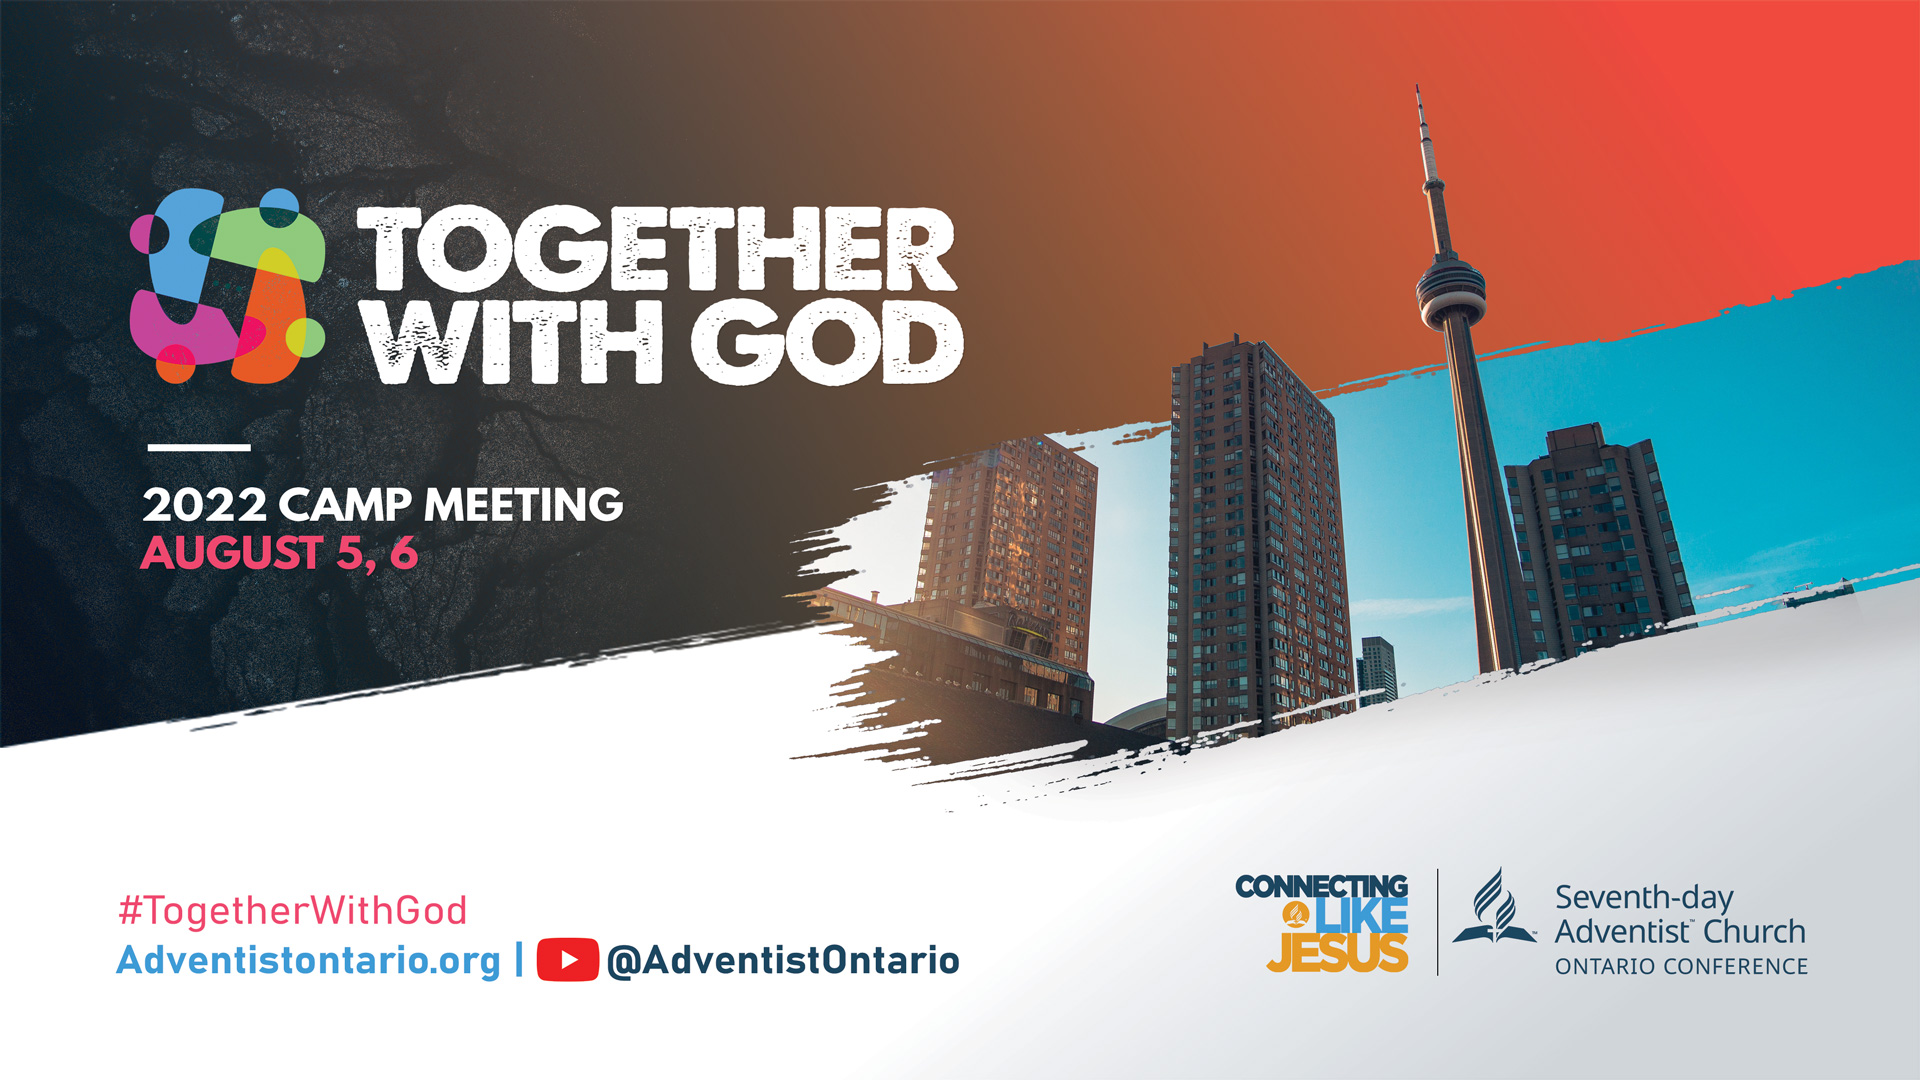 “Together With God” Camp Meeting 2022 Adventist Ontario Conference